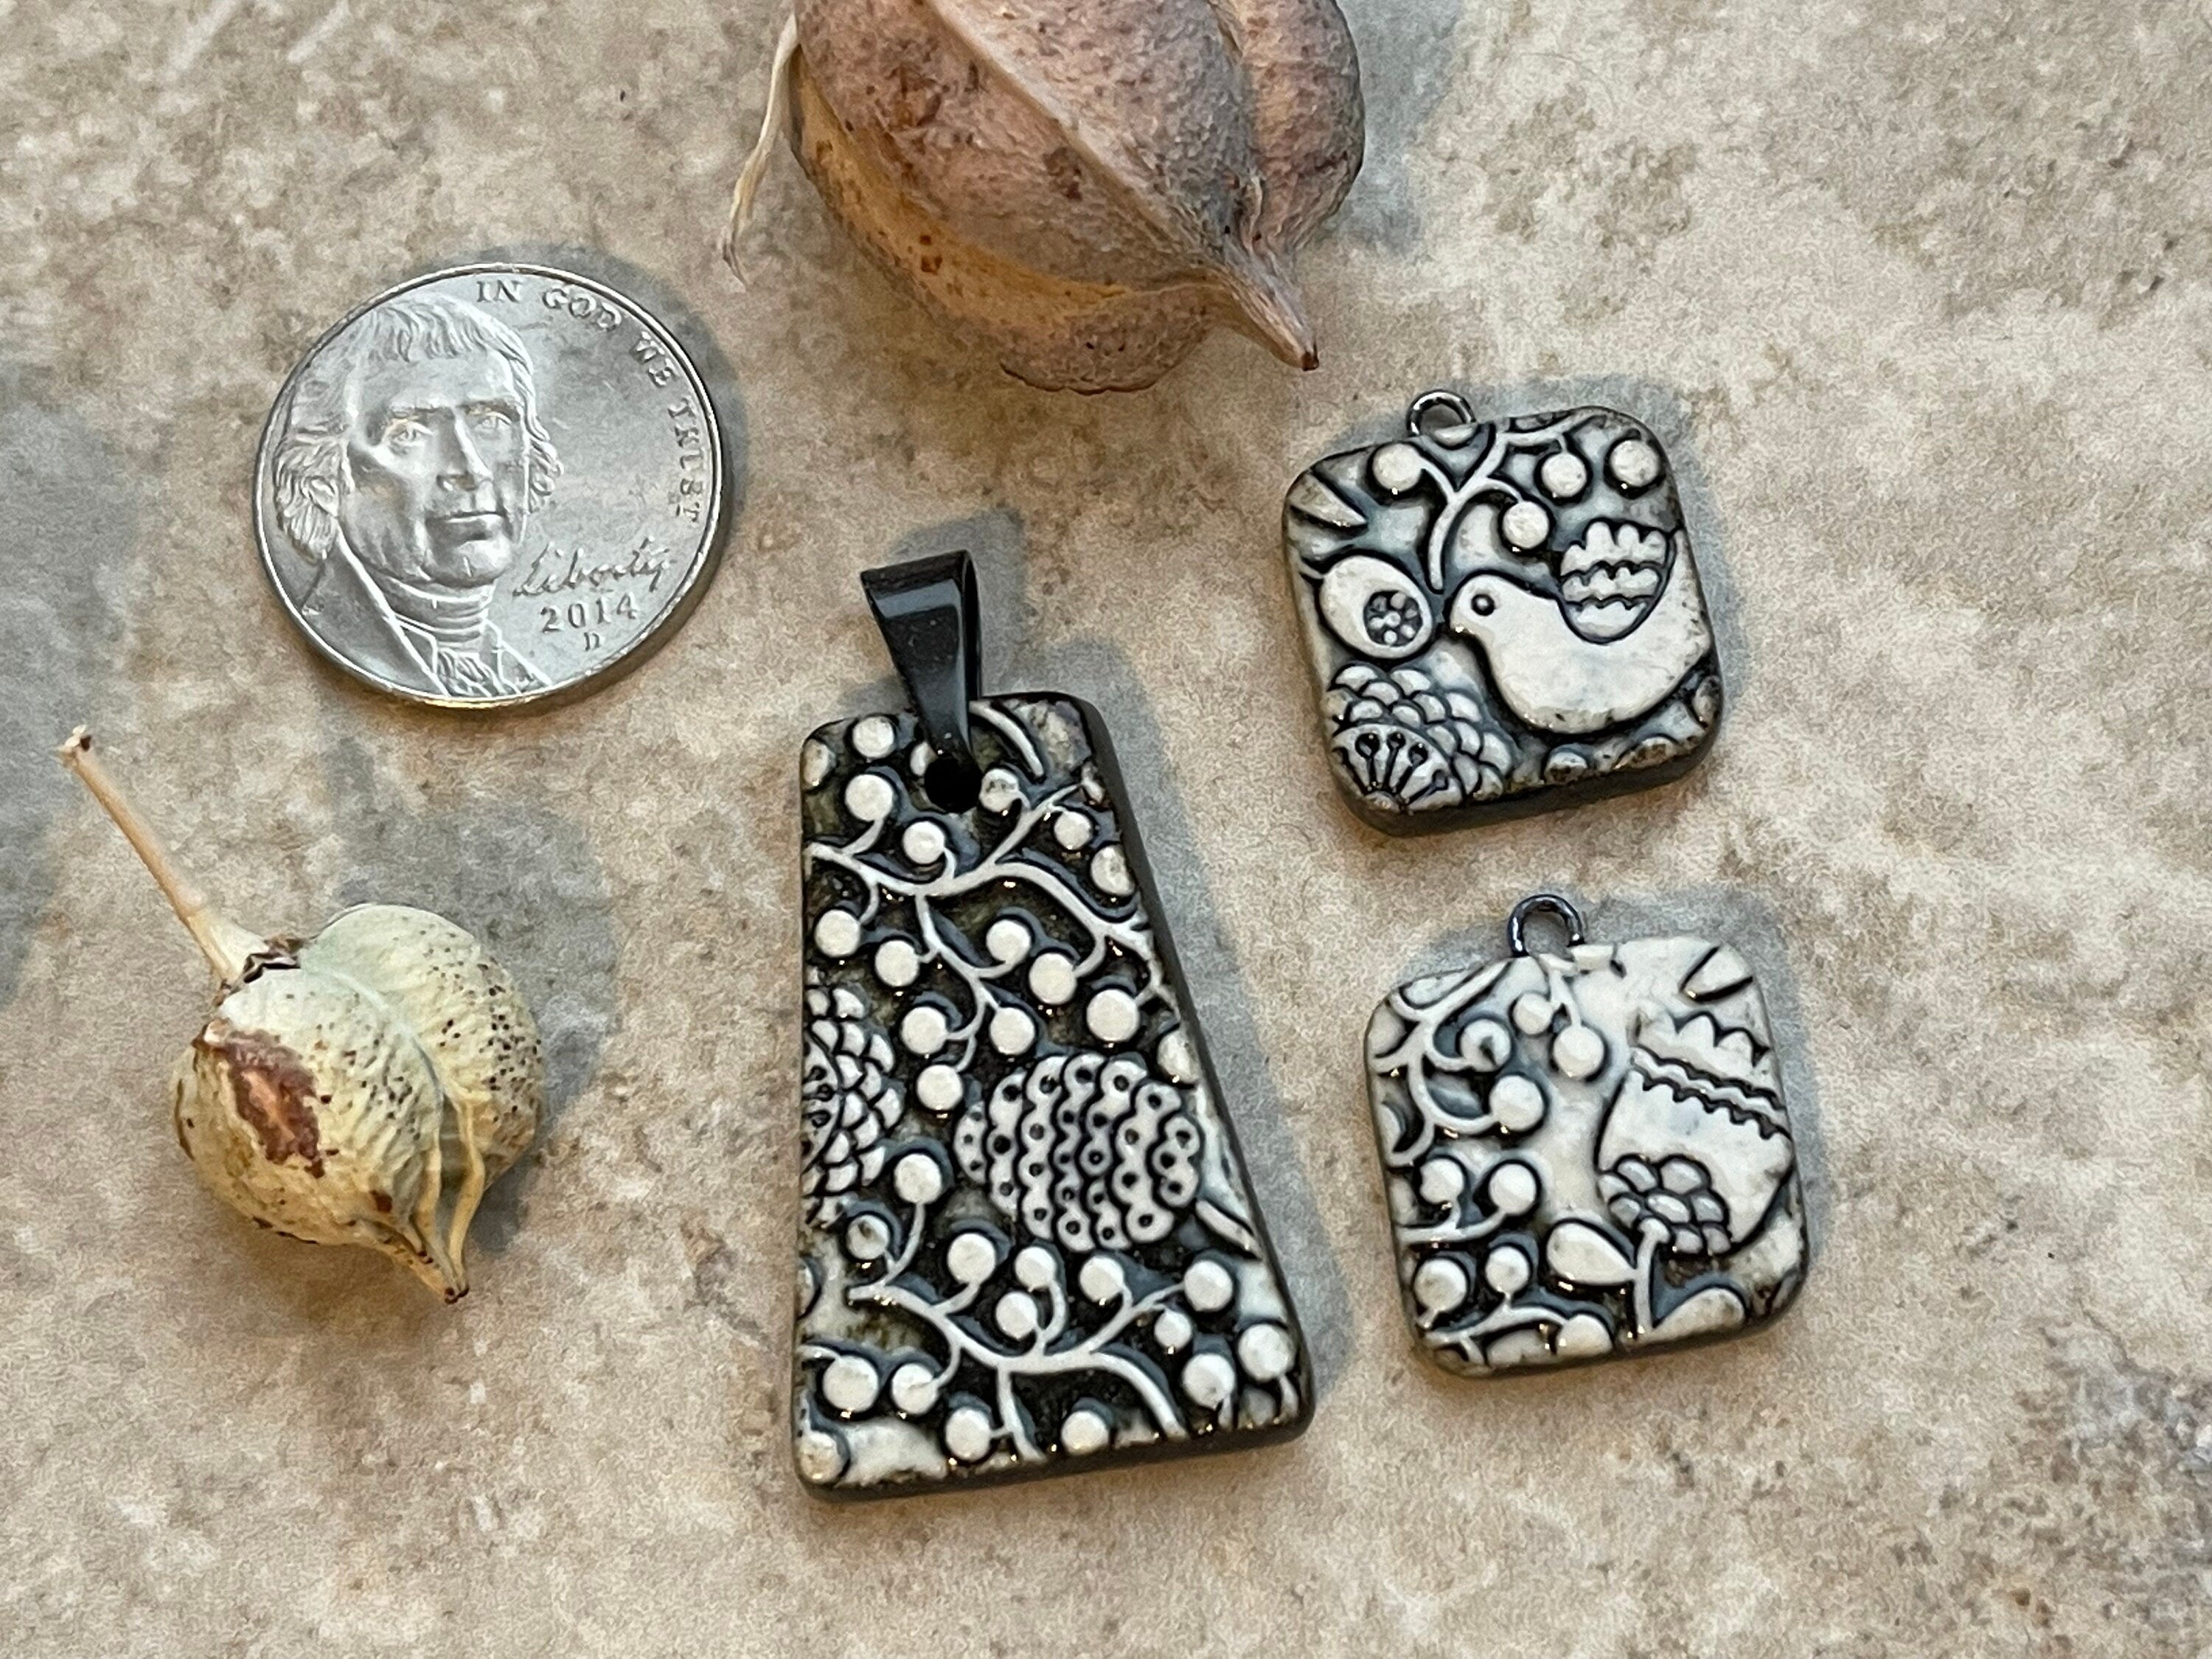 Triangle Pendant Set, Tulip Bead, Bird Bead, Black and White Scandinavian Earring Beads, Porcelain Ceramic Charms, Jewelry Making Components